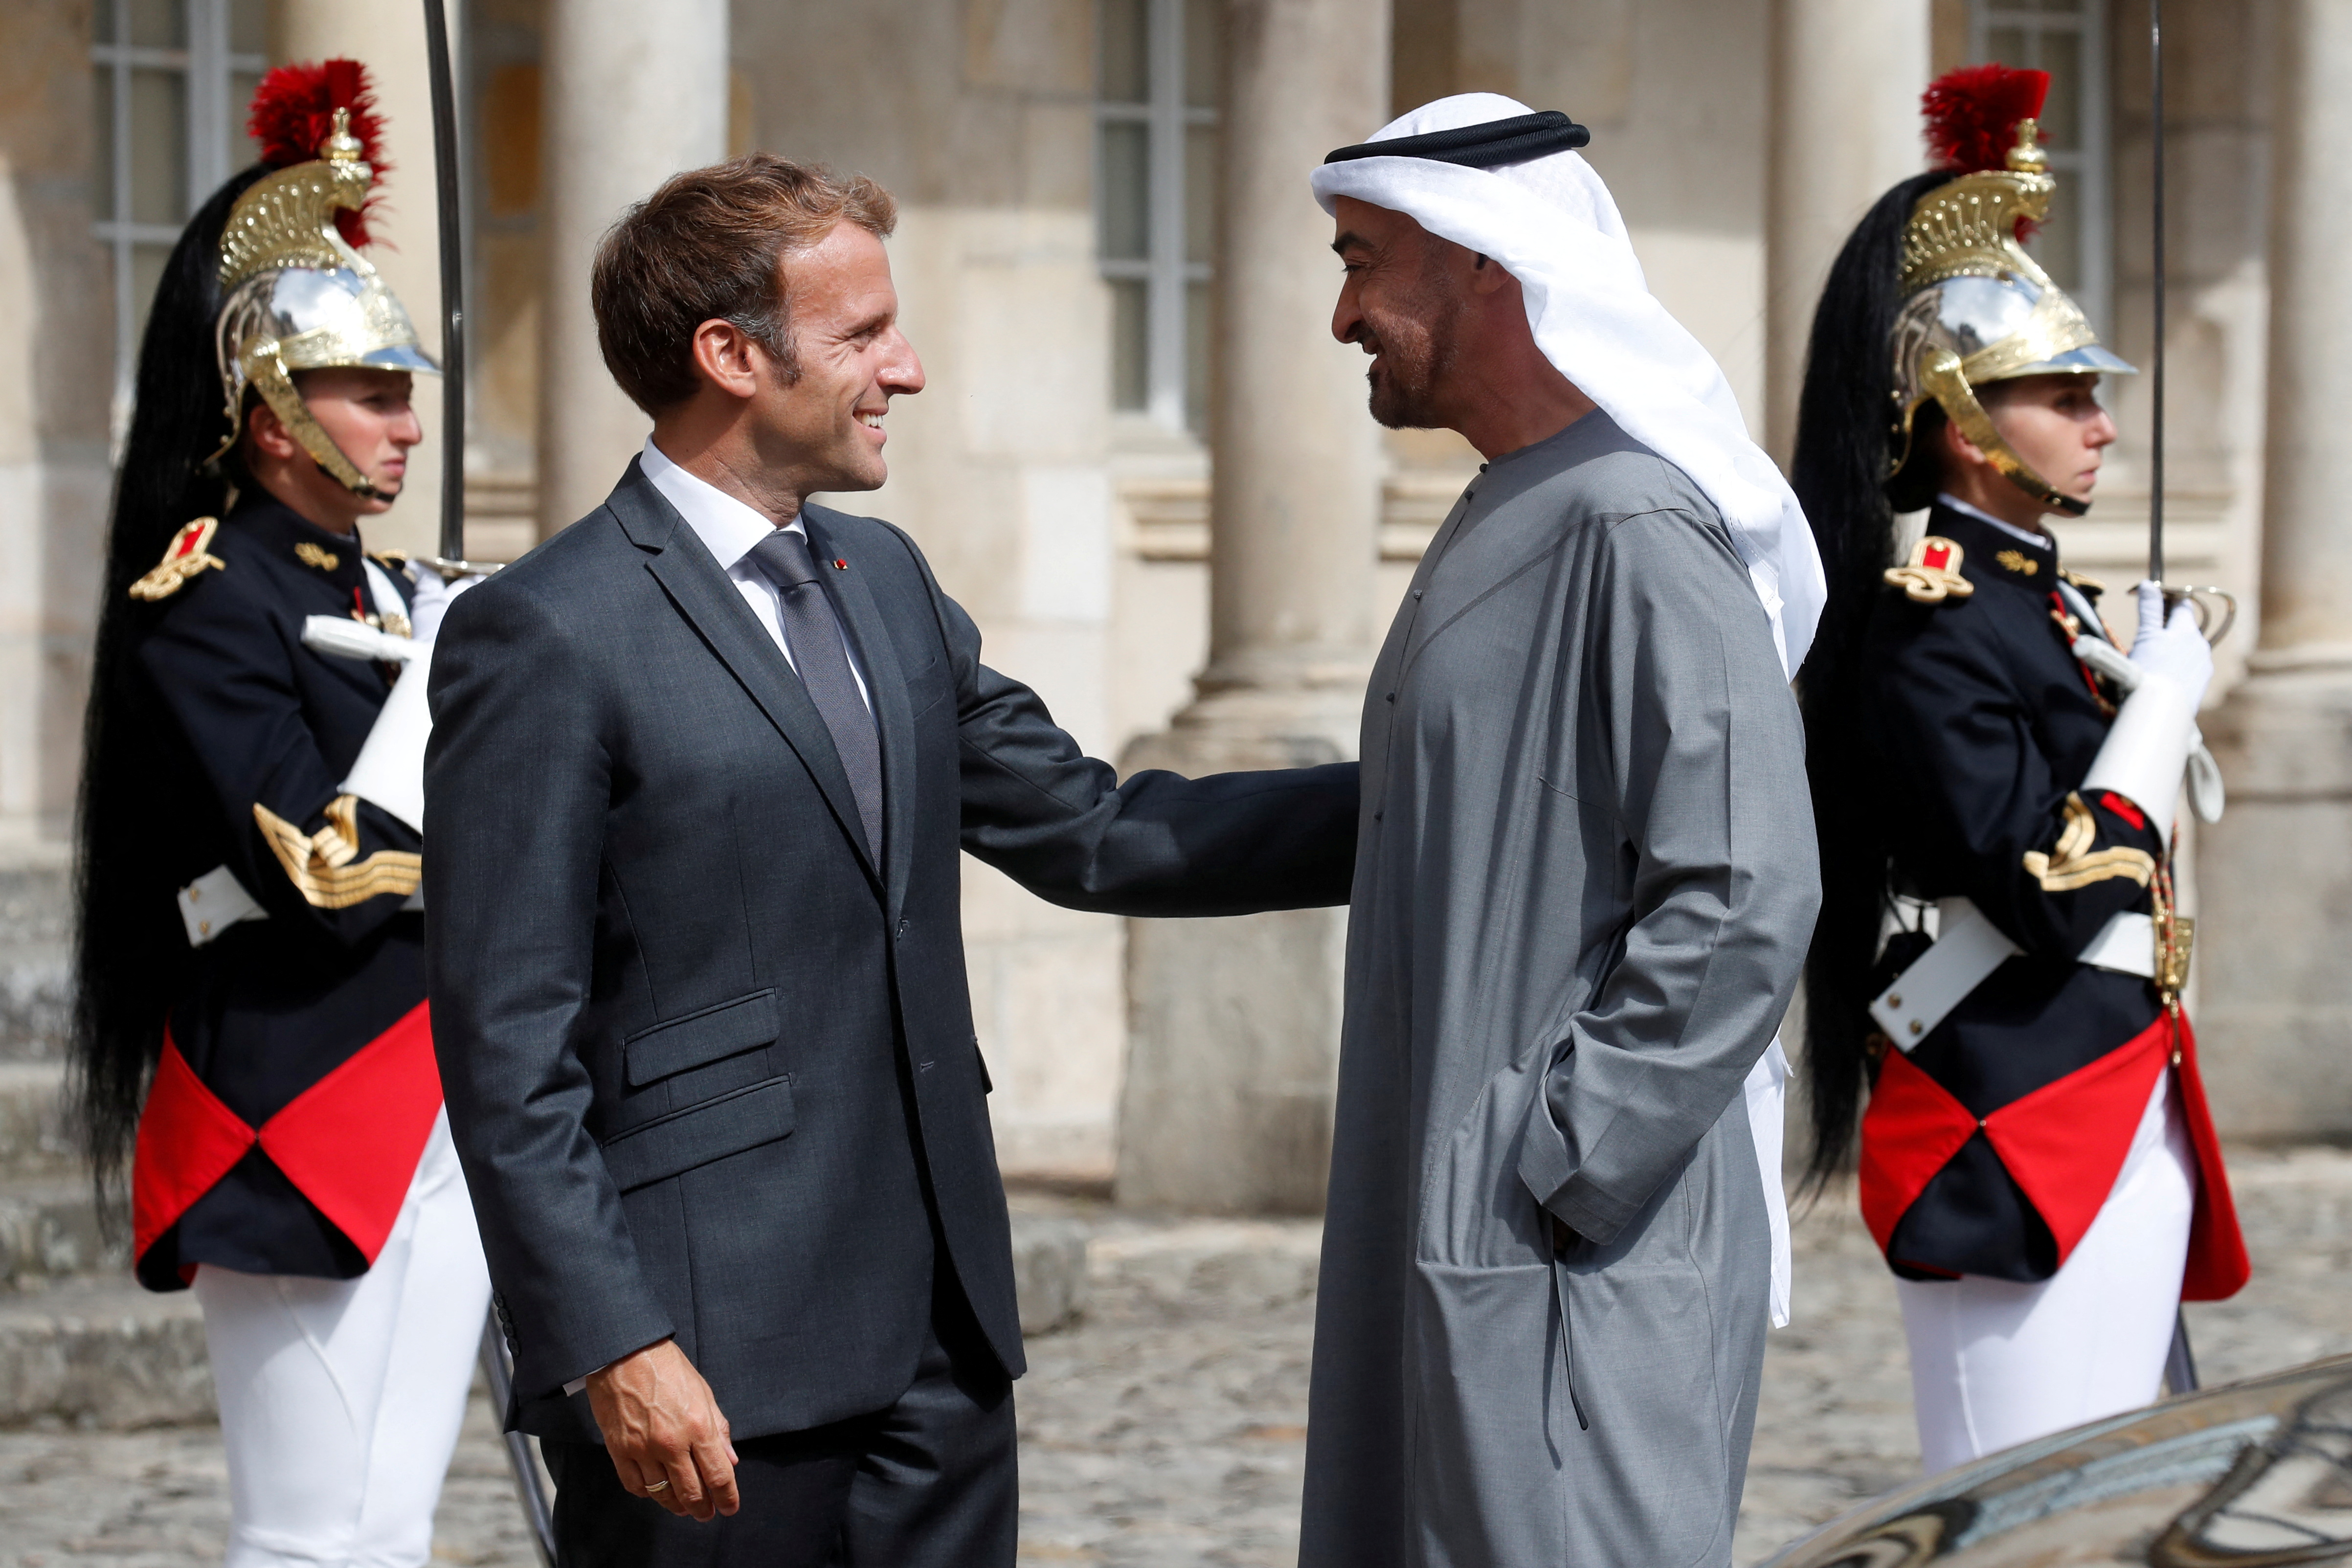 French President Emmanuel Macron meets Abu Dhabi's Crown Prince Sheikh Mohammed bin Zayed al-Nahyan in Fontainebleau